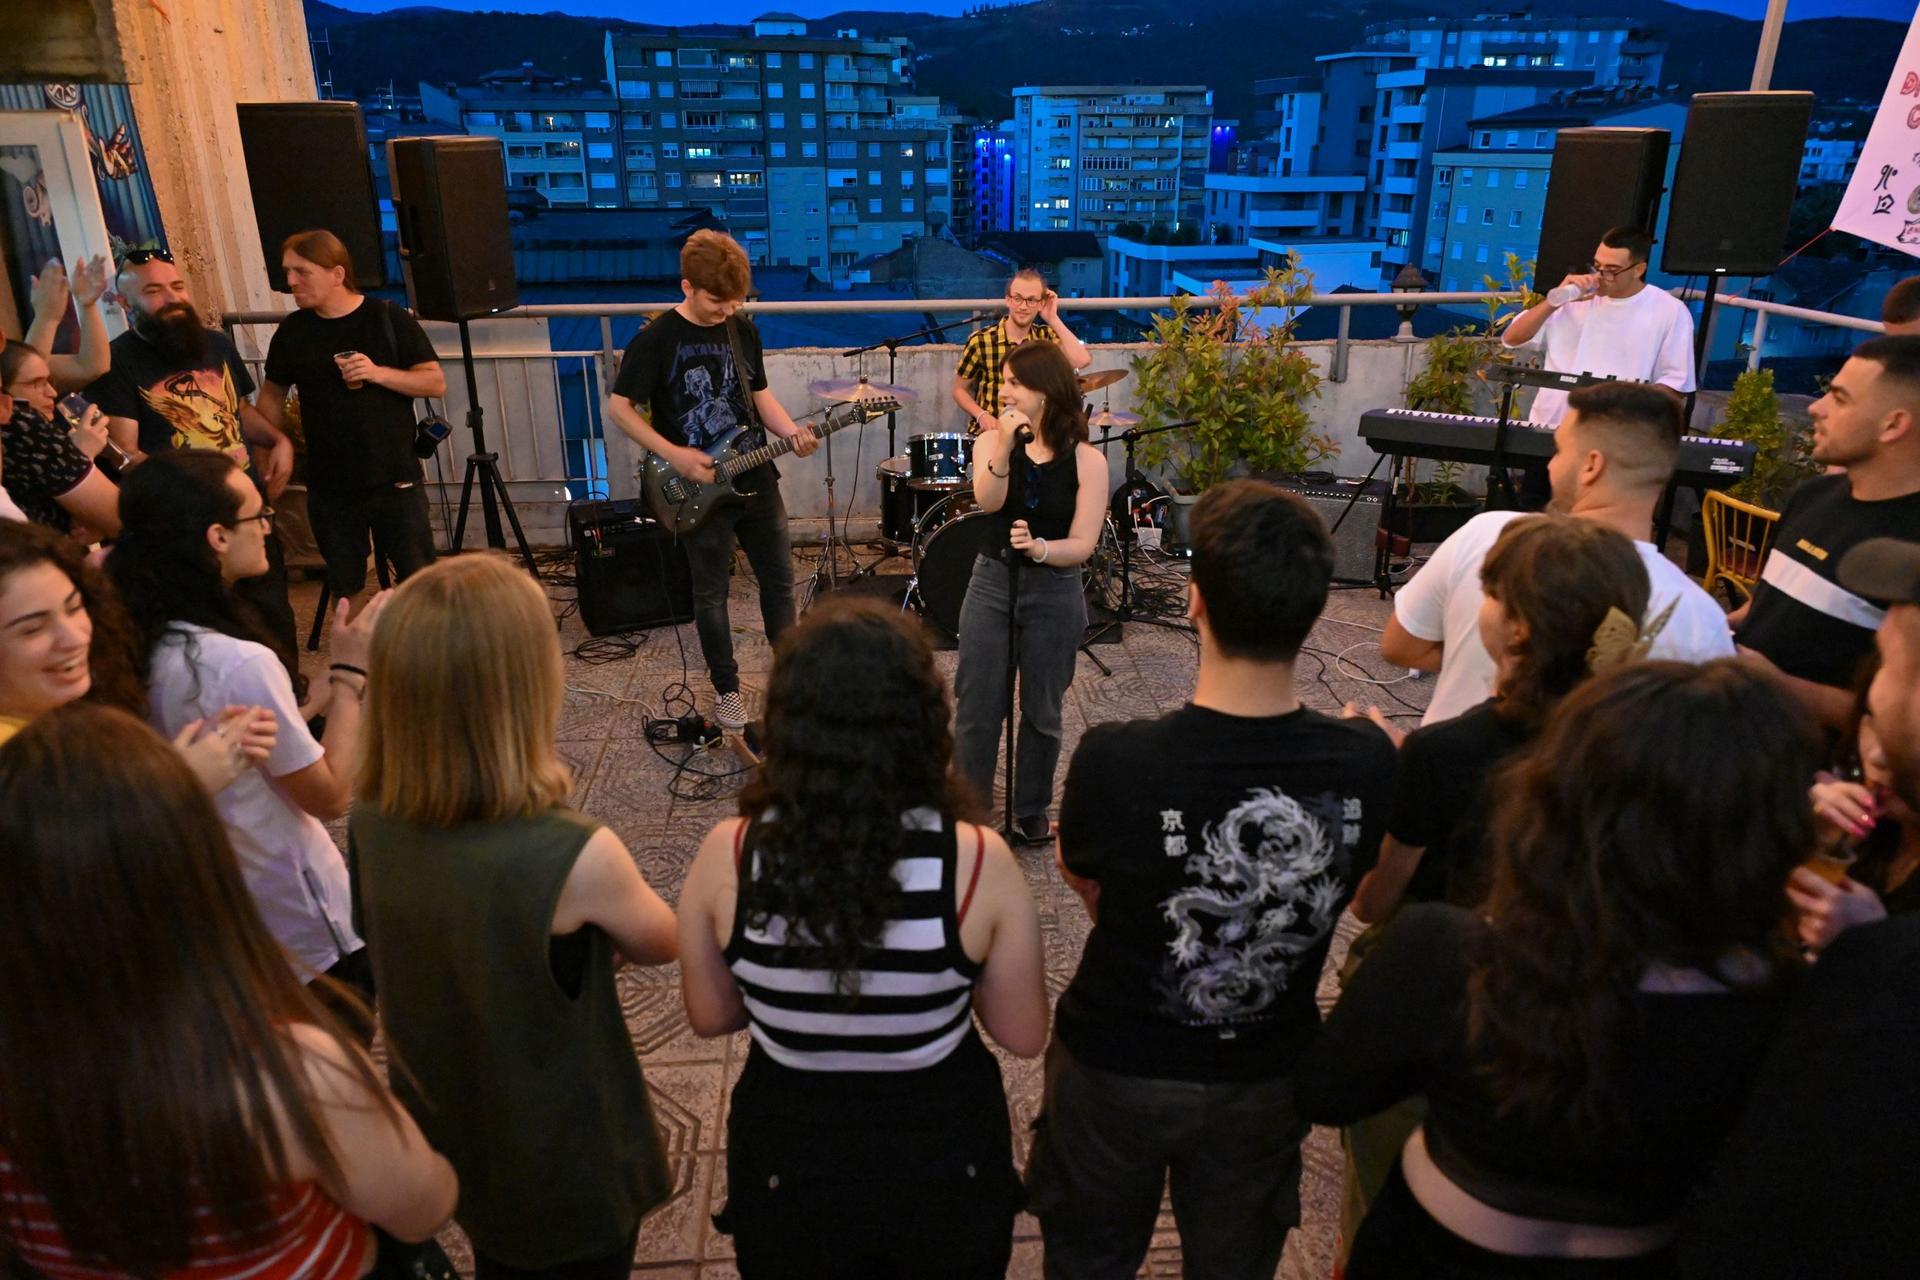 A crowd is standing on a terrace and is listening to a band of three people performing music